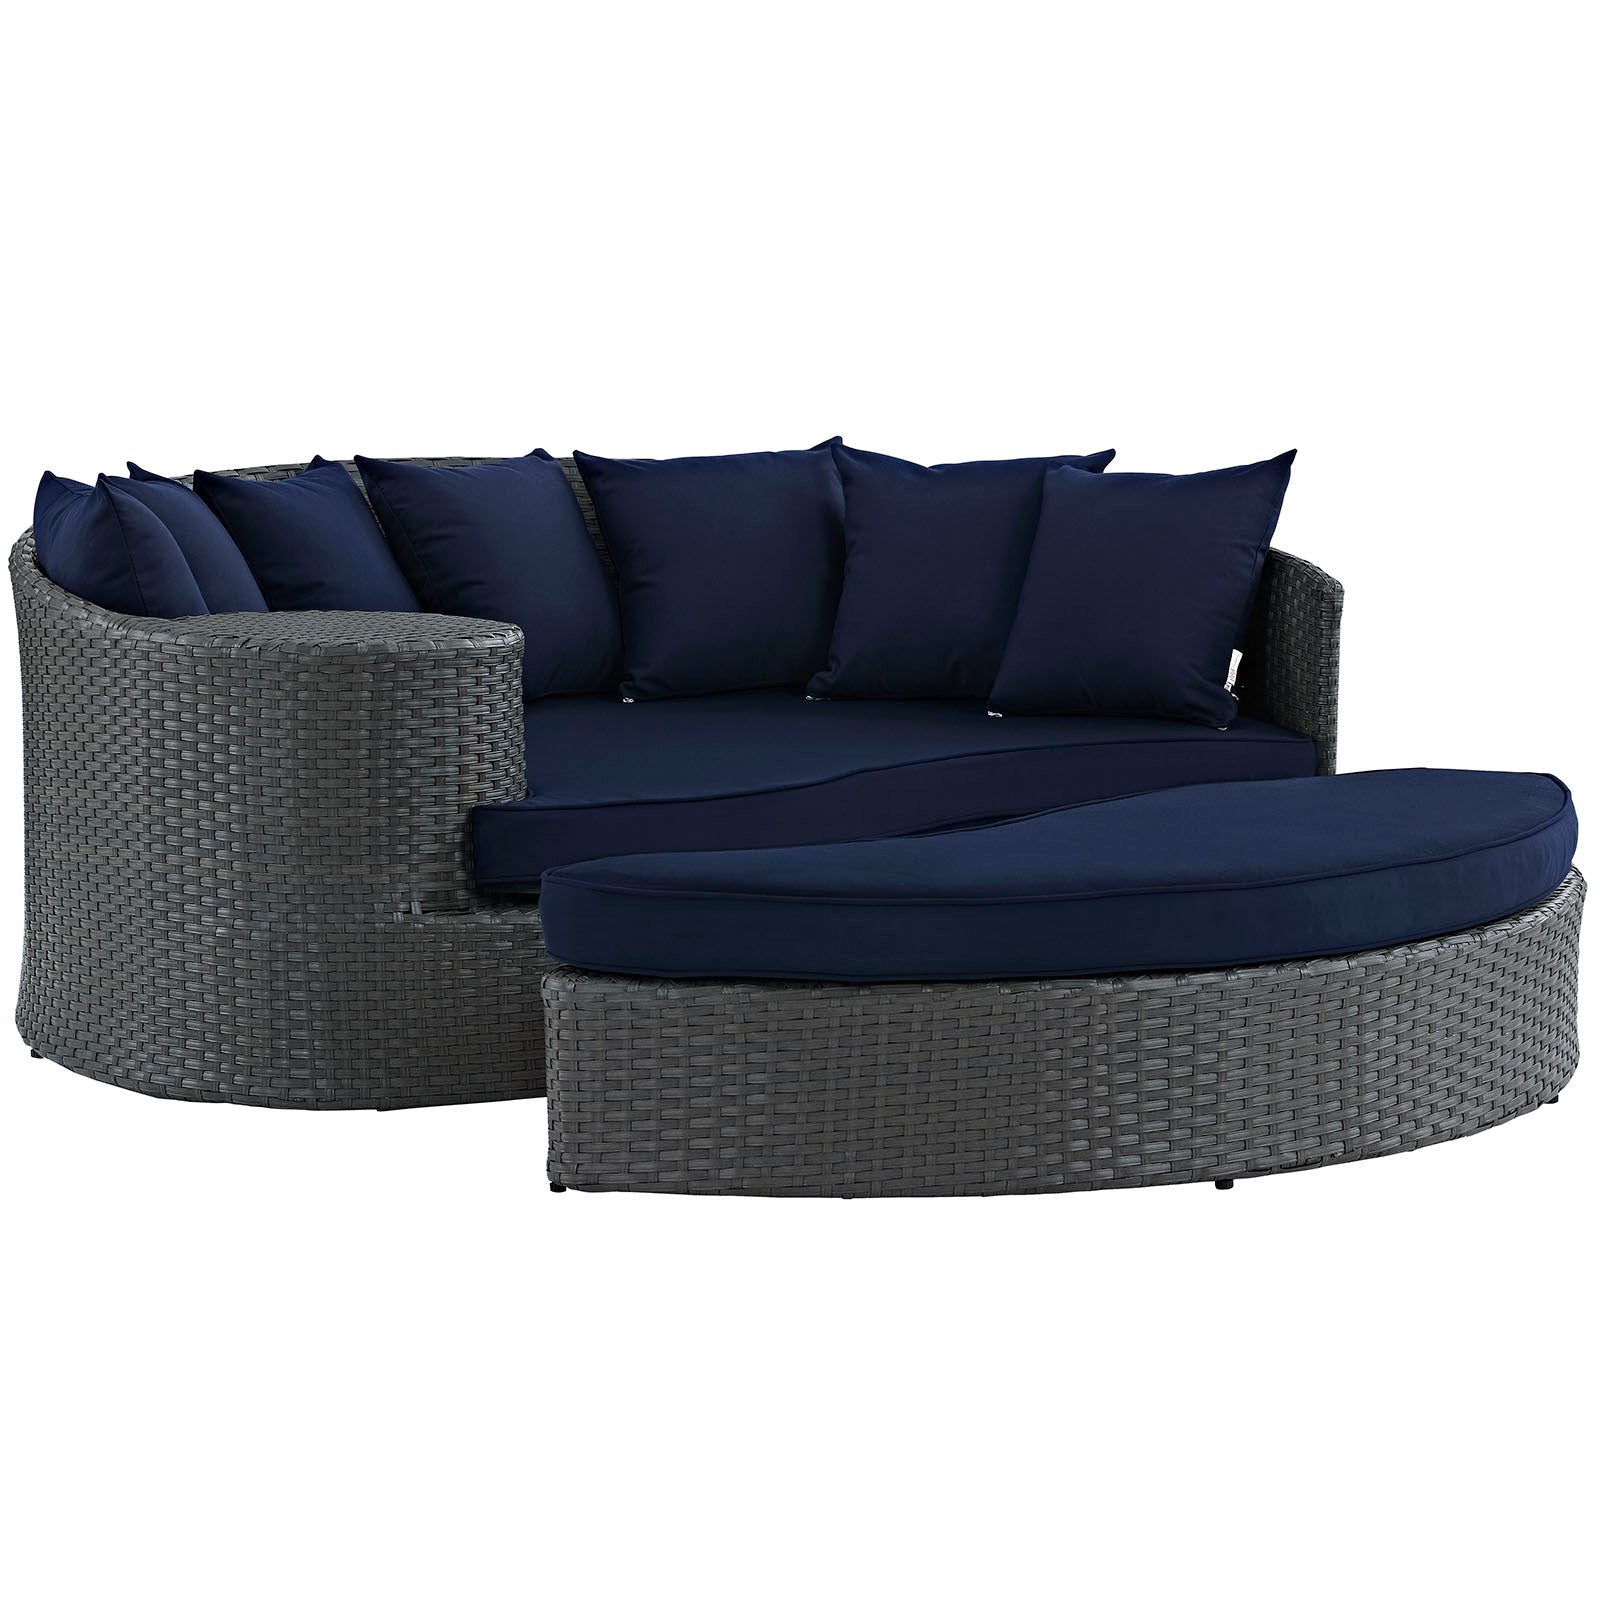 Modway Patio Daybeds - Sojourn Outdoor Patio Daybed Canvas Navy